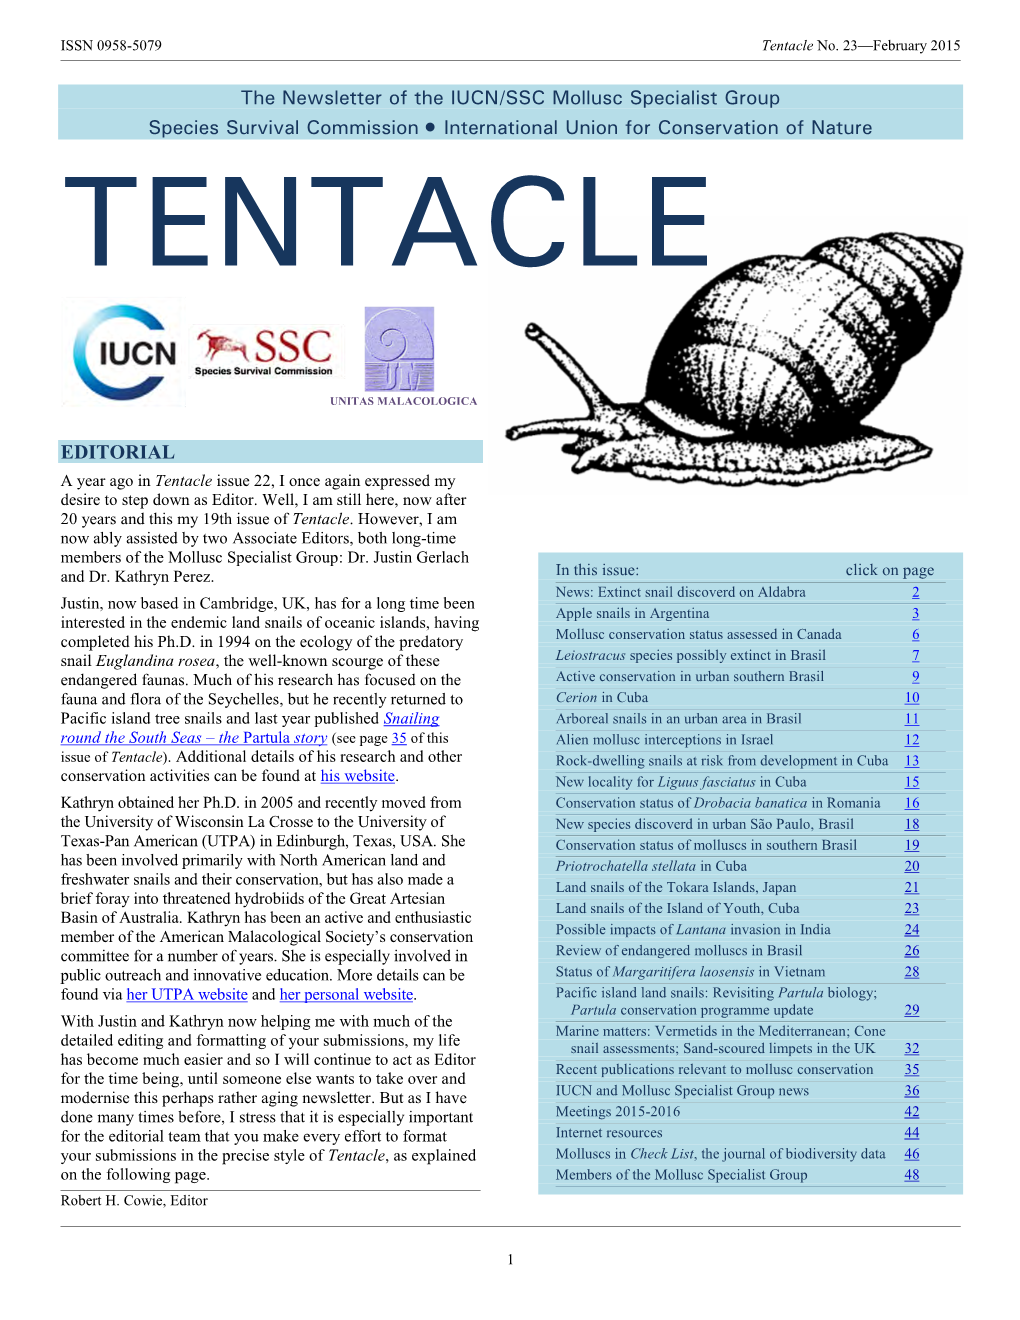 The Newsletter of the IUCN/SSC Mollusc Specialist Group Species Survival Commission • International Union for Conservation Of